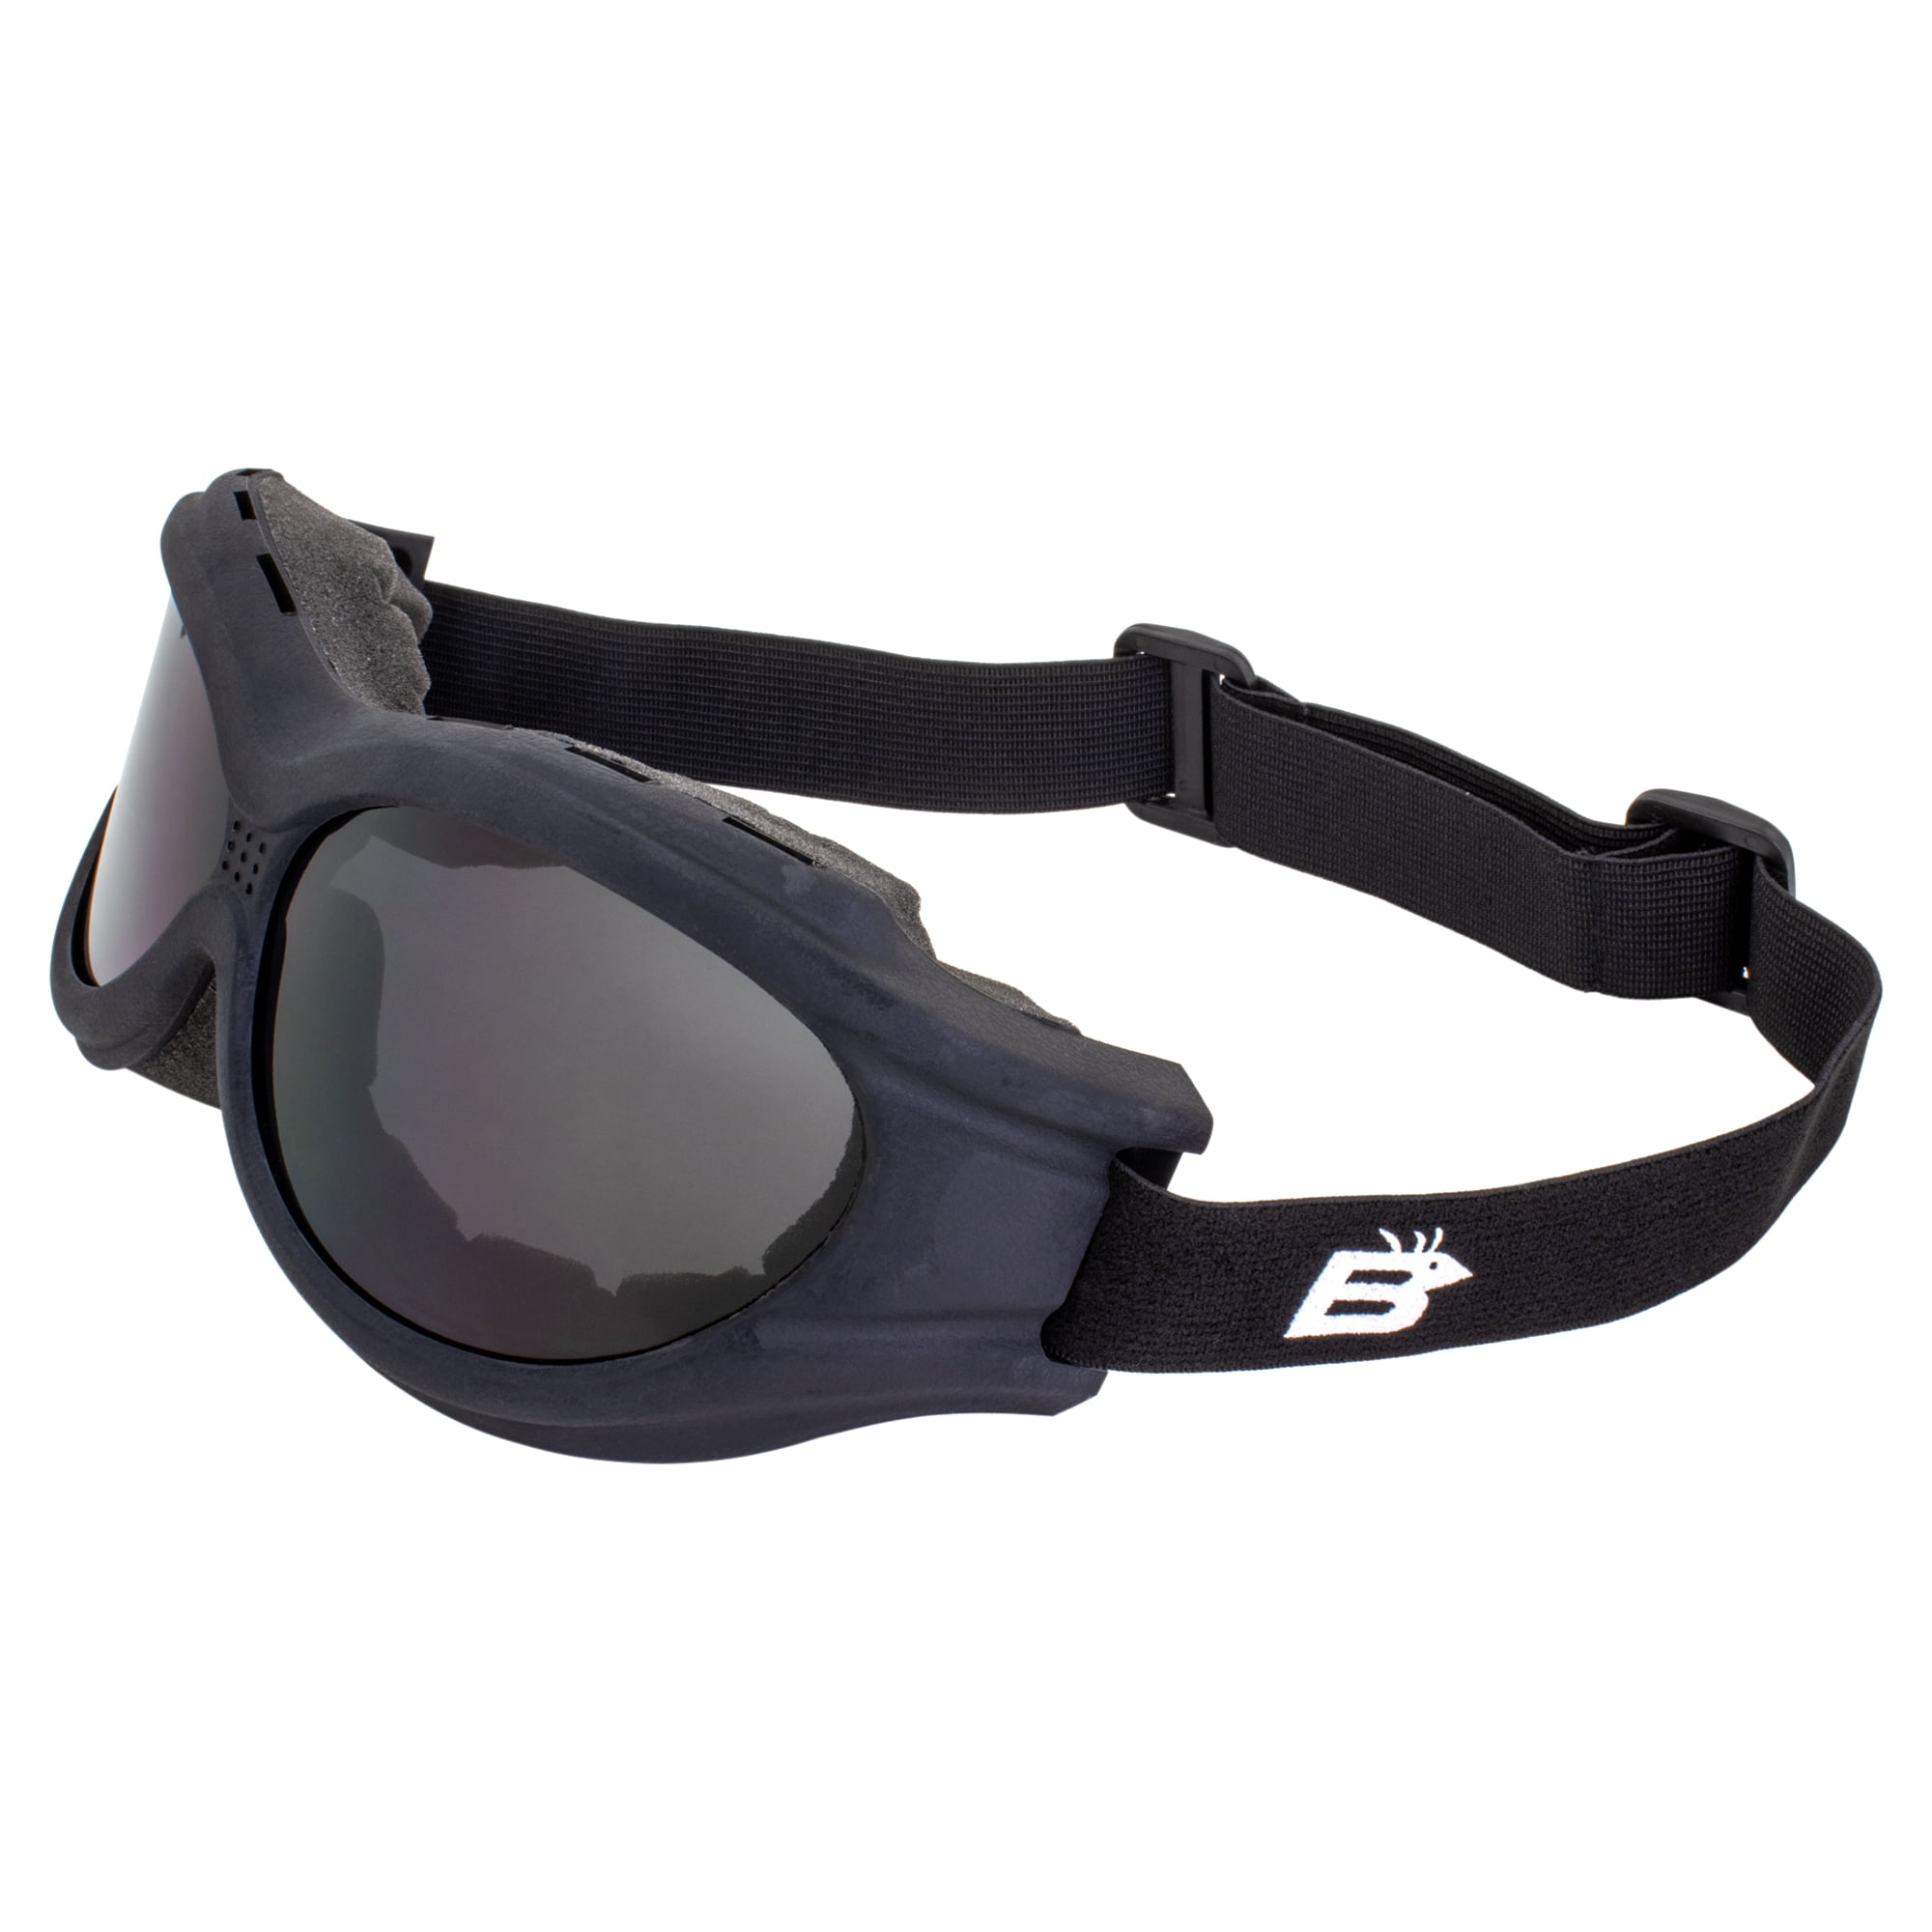 Big Ben Motorcycle Goggles Clear Lense Fit Over Glasses 